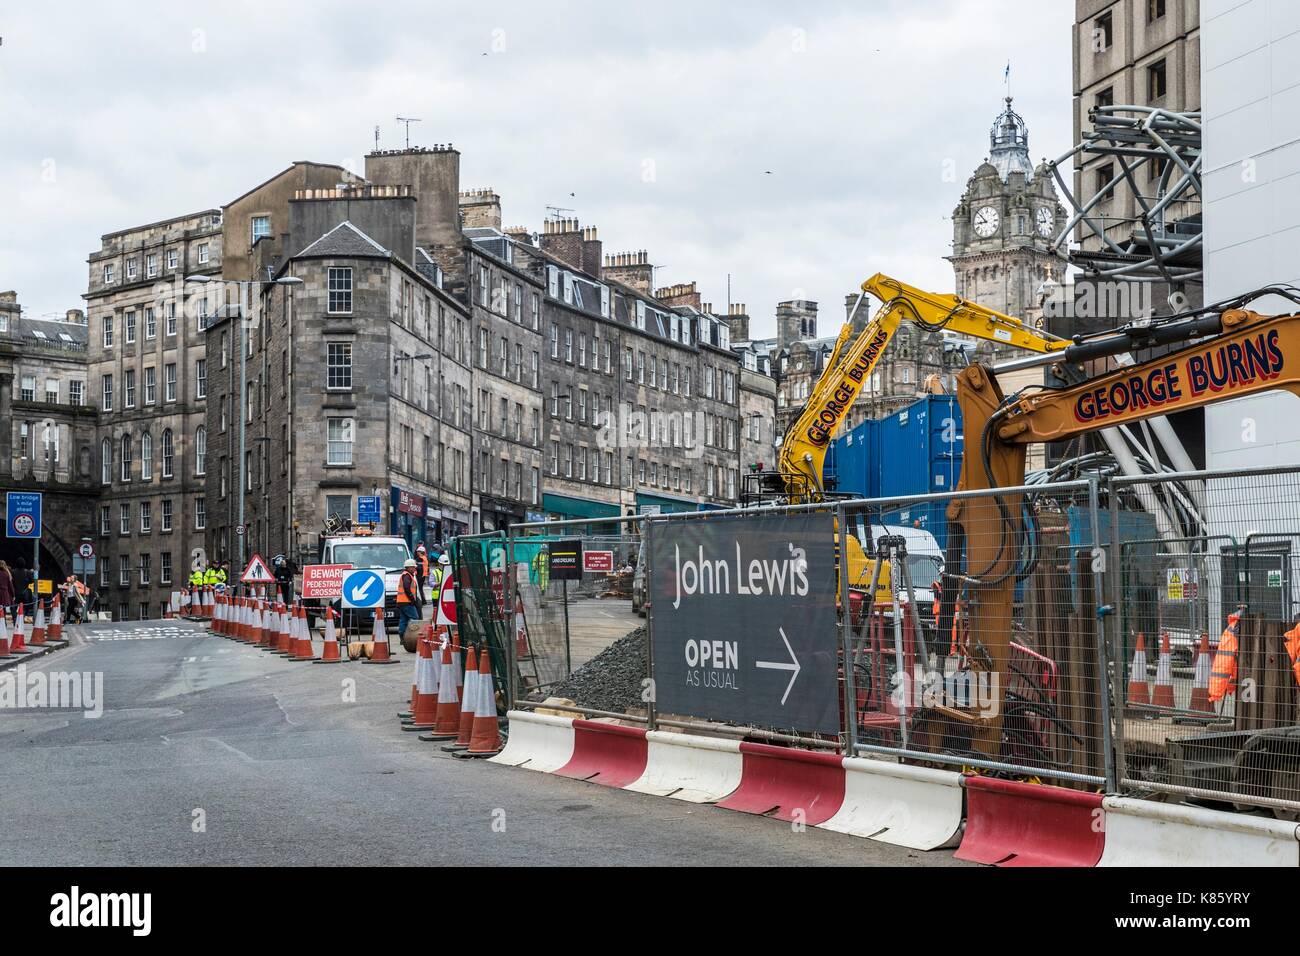 Edinburgh, UK. 18th Sep, 2017. The famous 'Bendy Bridge' has been removed from Leith Street in Edinburgh over the weekend to allow the development of the new St James Quarter Credit: Rich Dyson/Alamy Live News Stock Photo